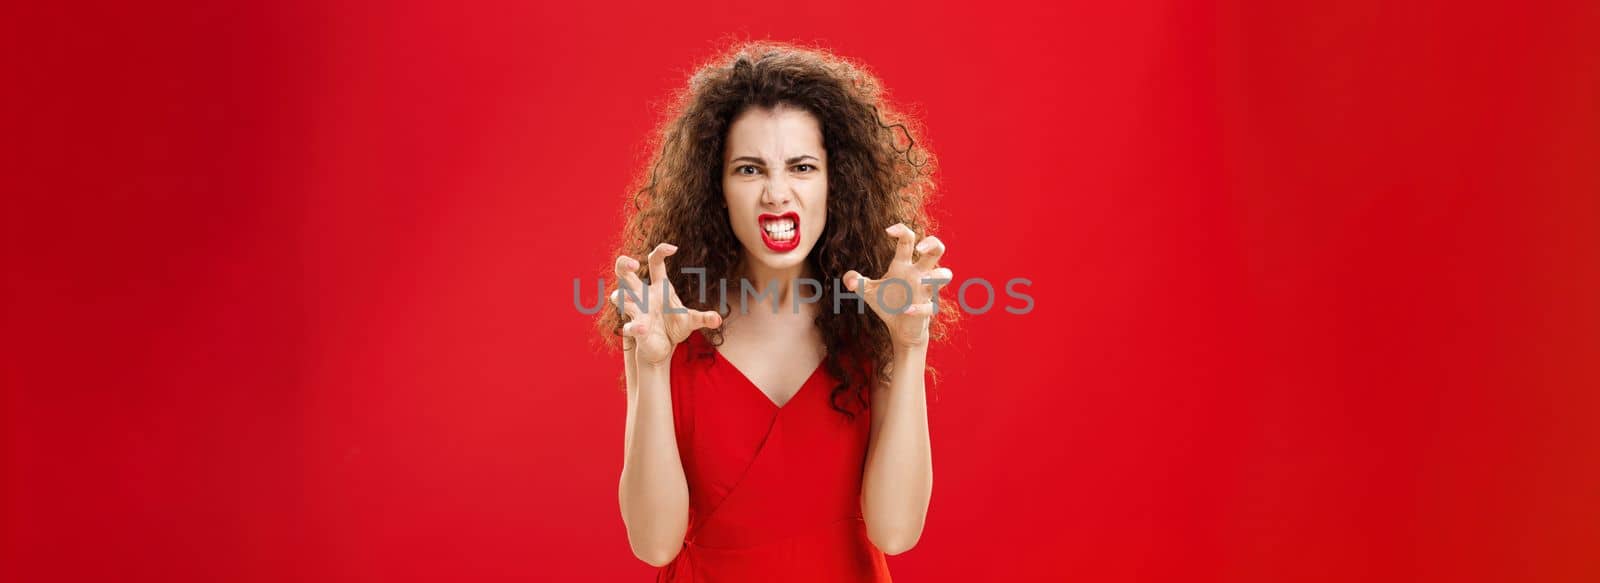 Woman like panter wanting scratch eyes of enemy. Portrait of pissed angry and pressured fed up woman clenching teeth and hands as if choking enemy with hate and anger in eyes being scary over red wall.